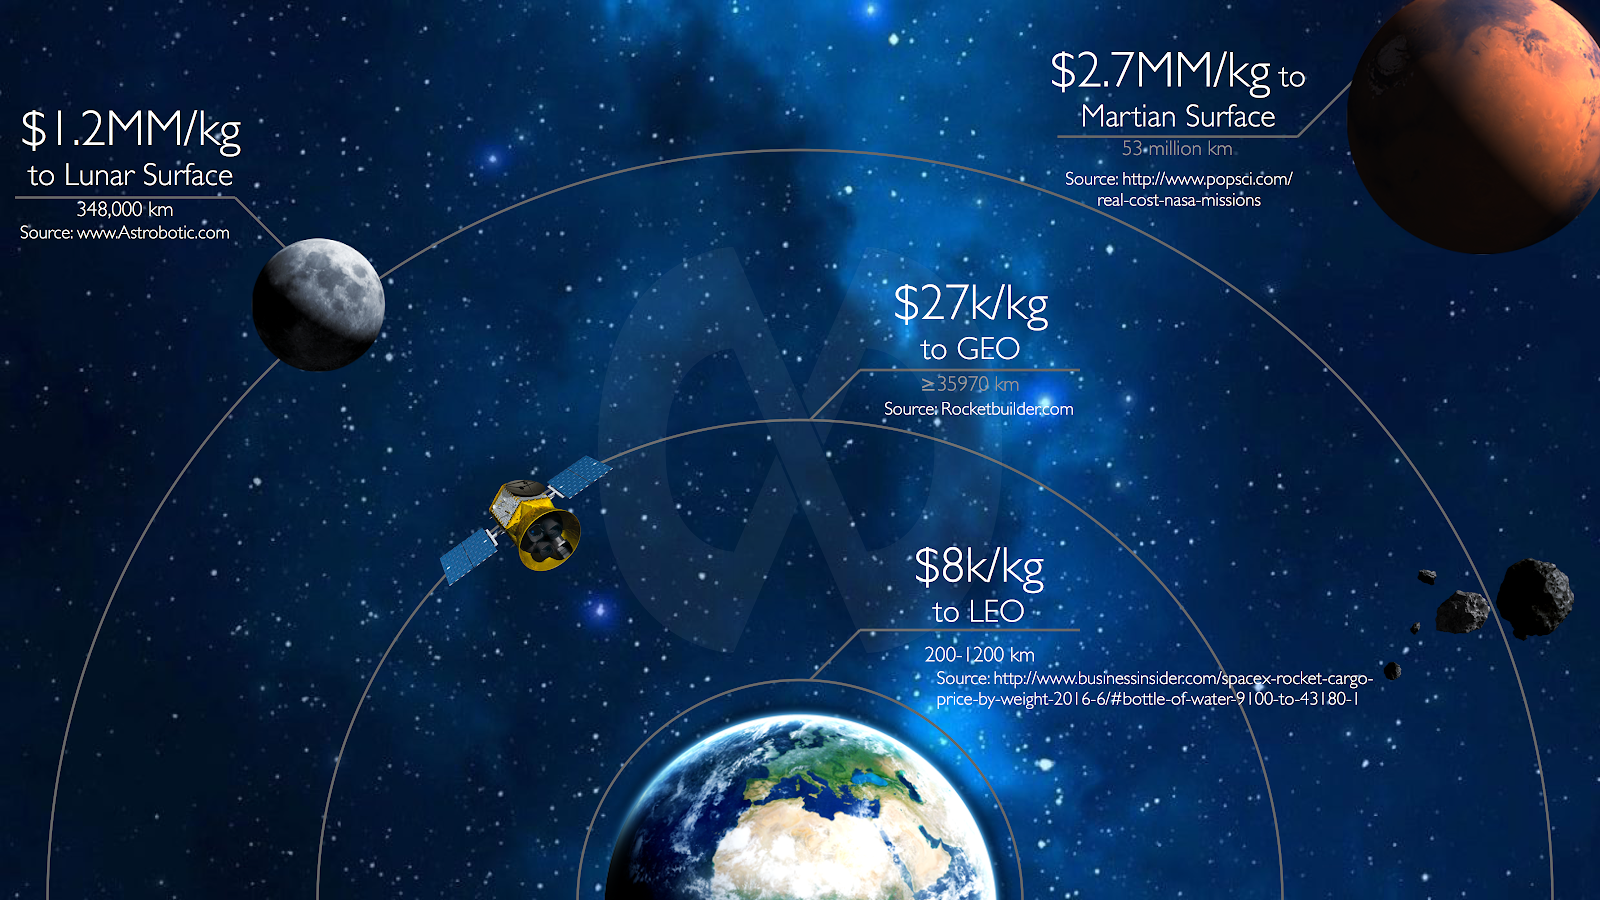 A visual graphic demonstrating the cost per kilogram from Low Earth Orbit at $8,000 per kilogram, to GEO at $27,000 per kilogram, to the Lunar surface at $1.2 million per kilogram, and finally $2.7 million for one kilogram to the surface of Mars.